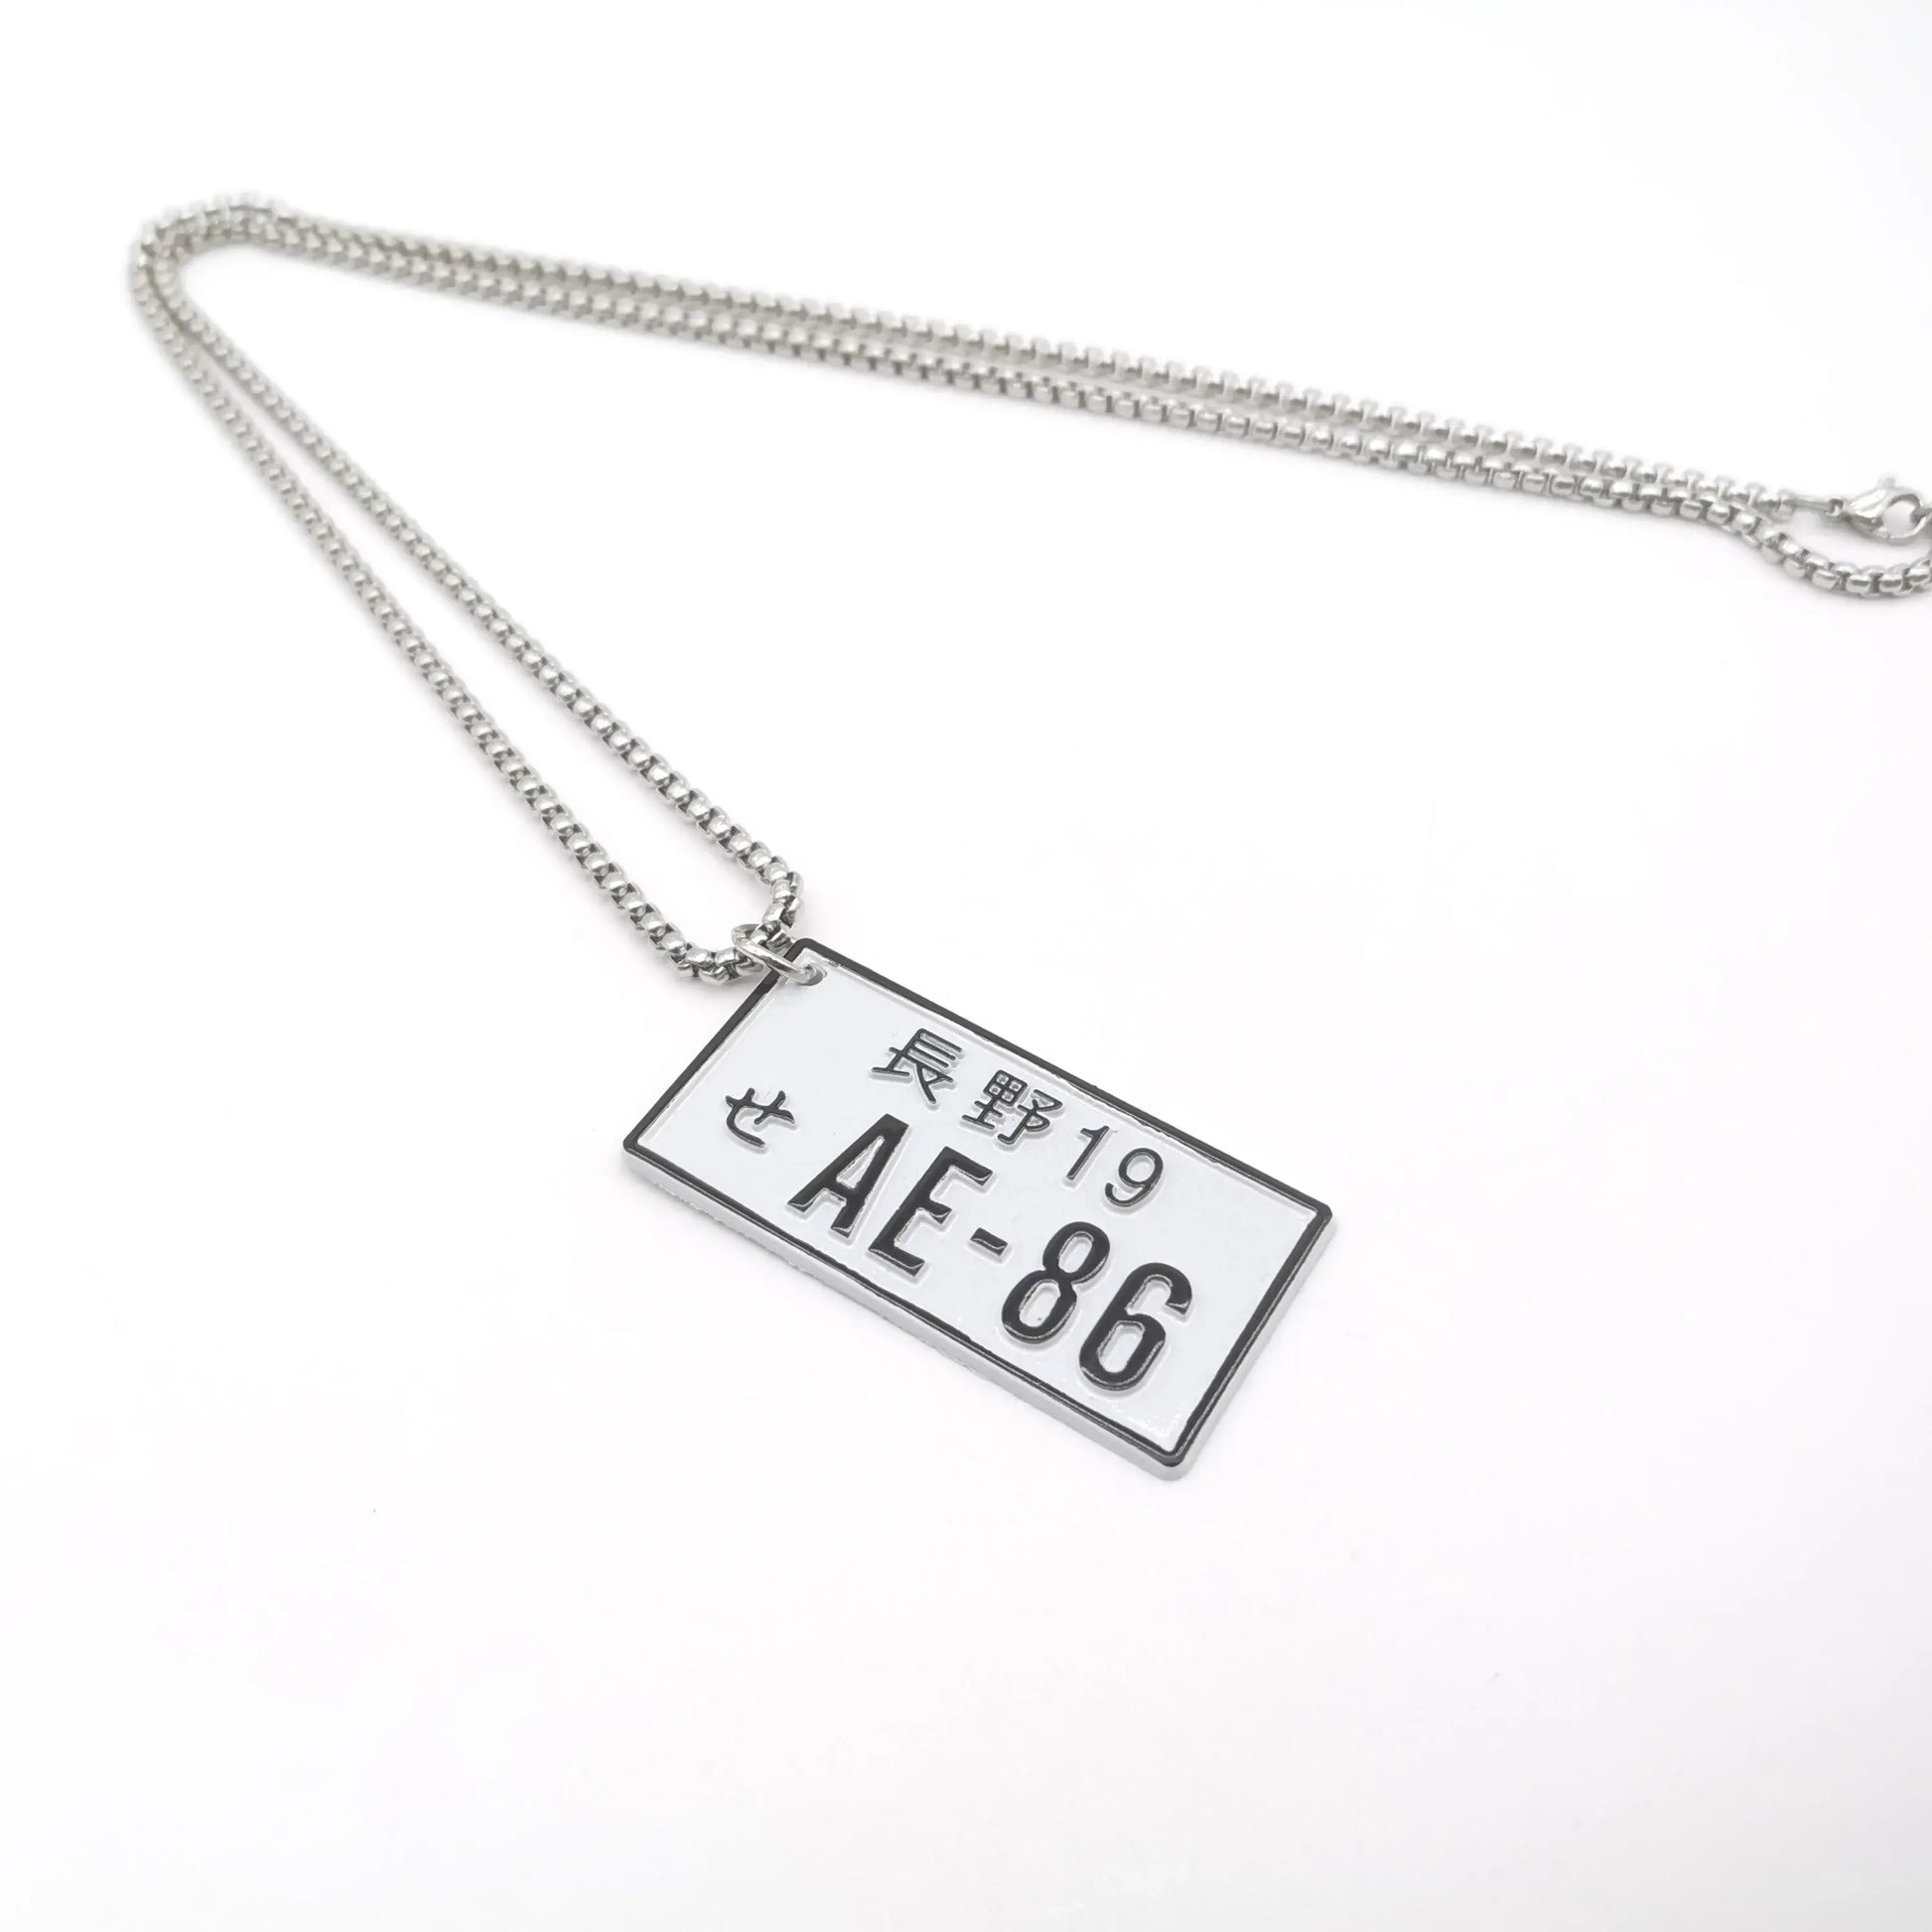 AE-86 JDM Plate Necklace